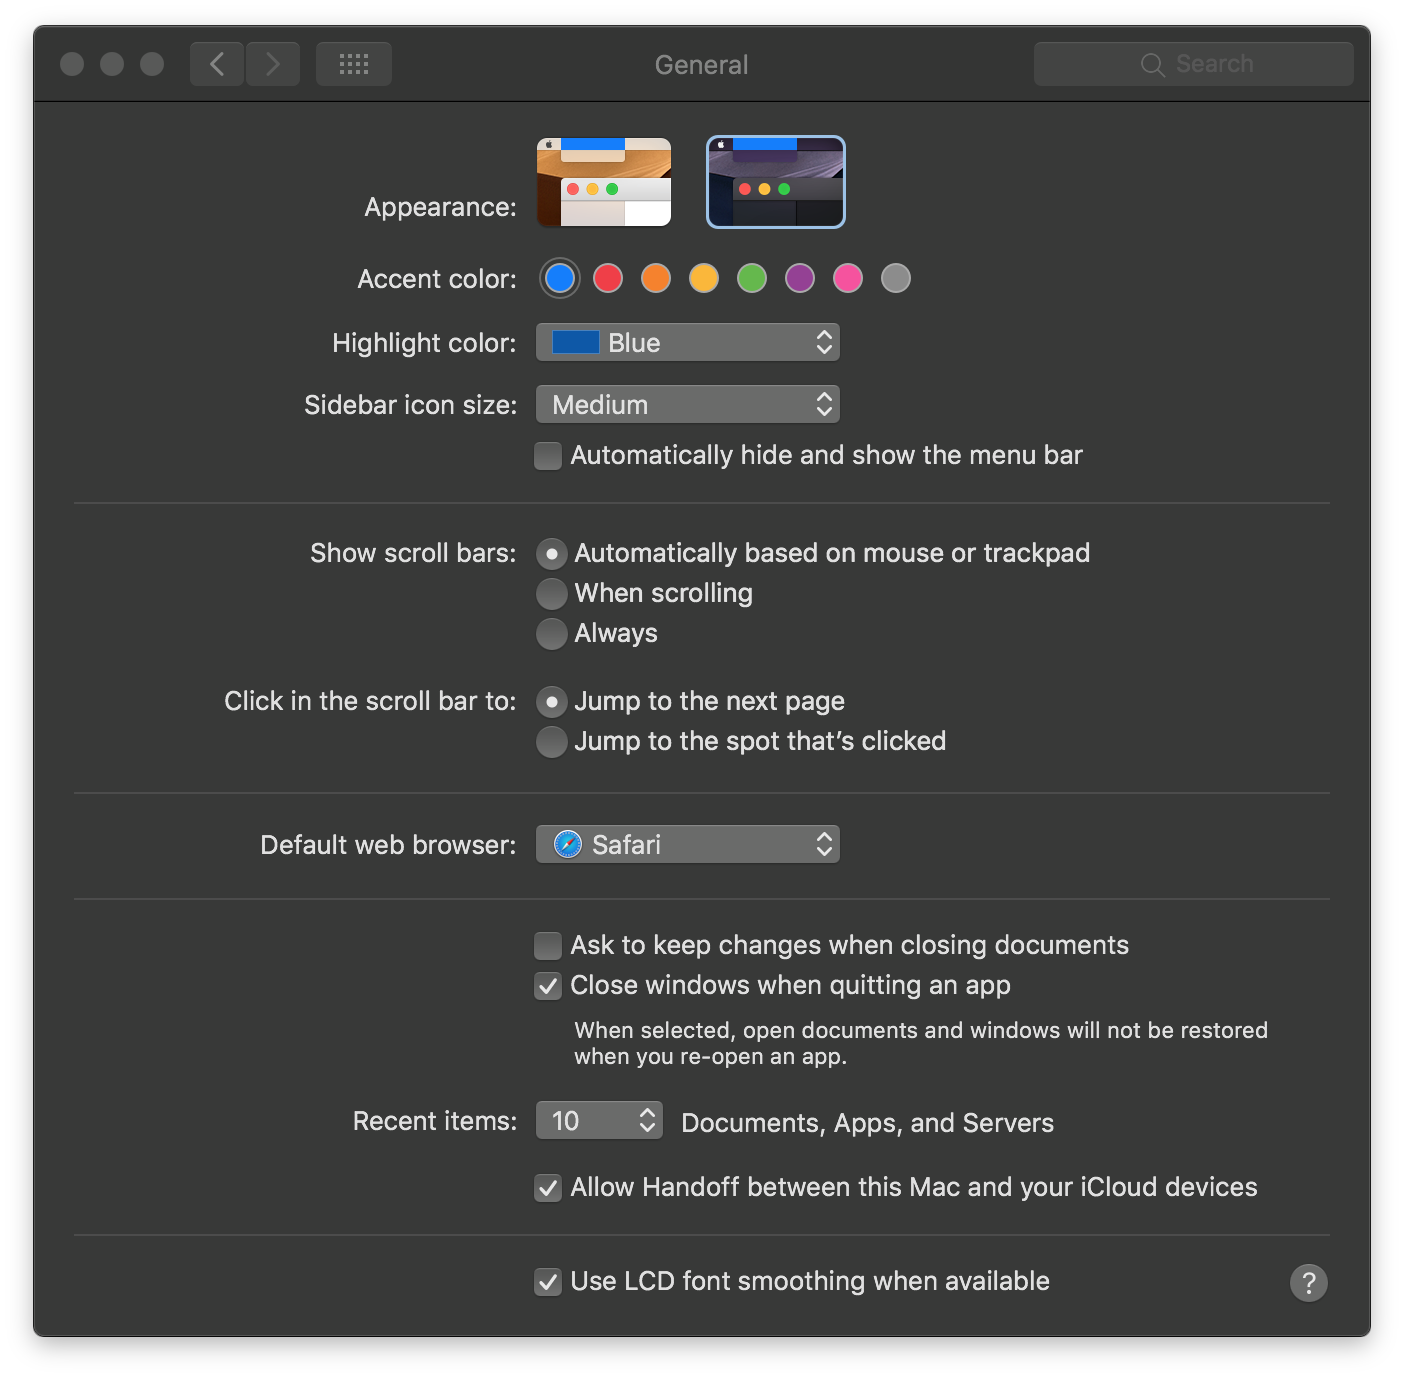 The General section of System Preferences lets you switch on Dark Mode in macOS Mojave